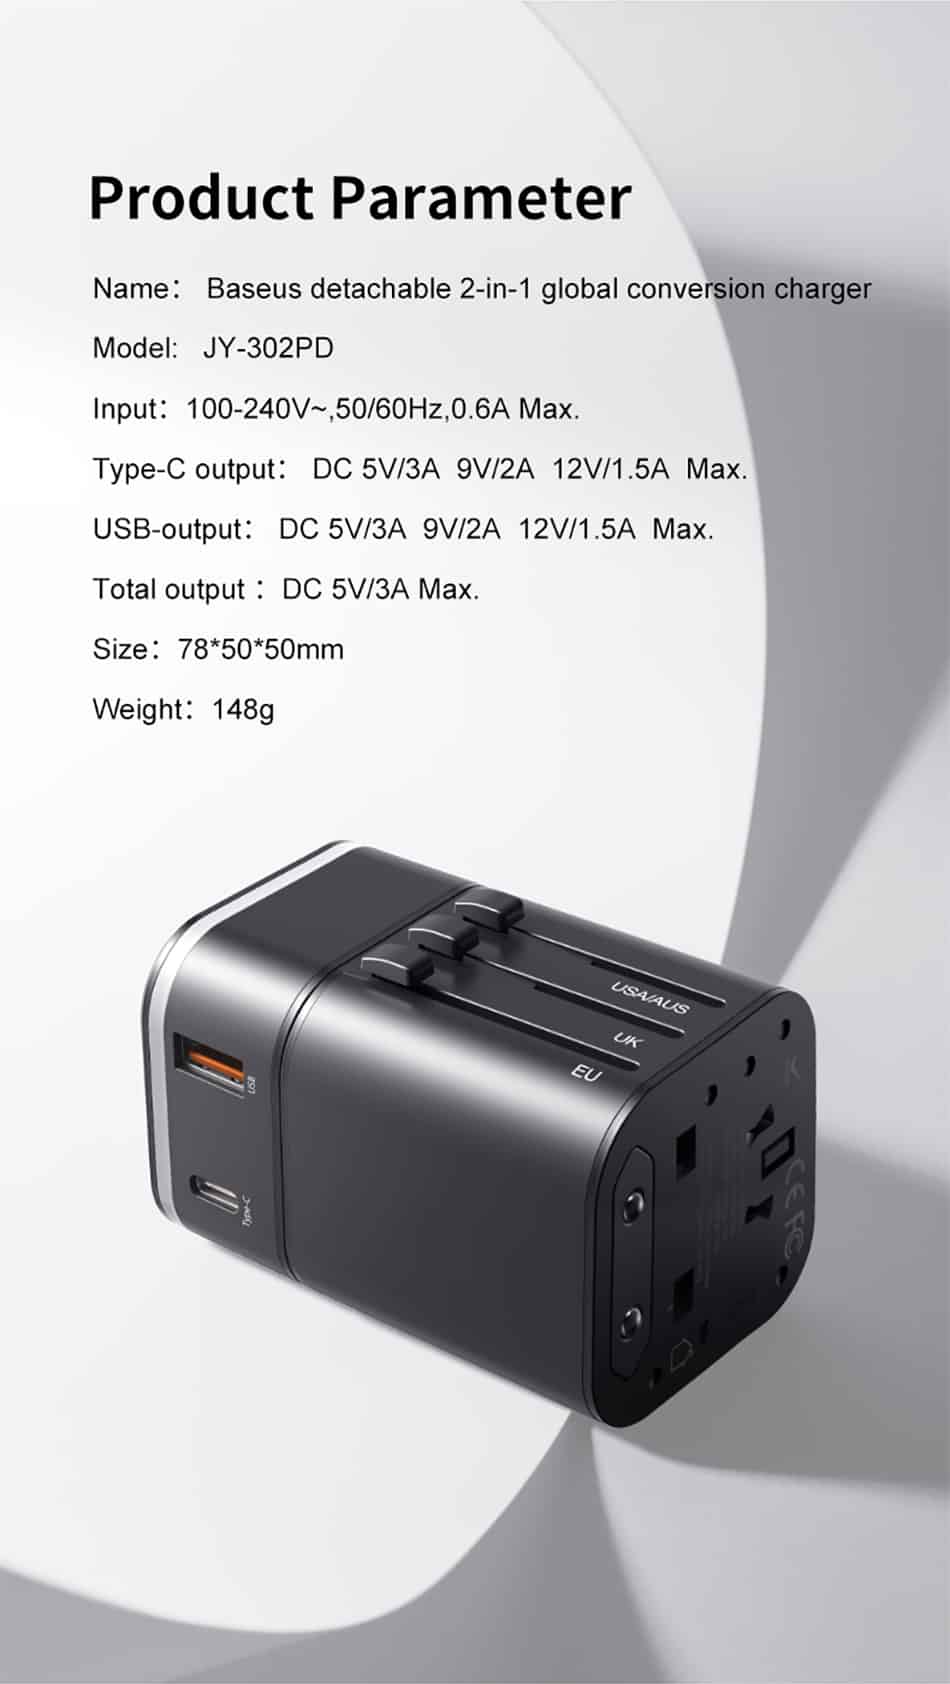 baseus 2-in-1 universal travel adapter with detachable pps quick wall charger